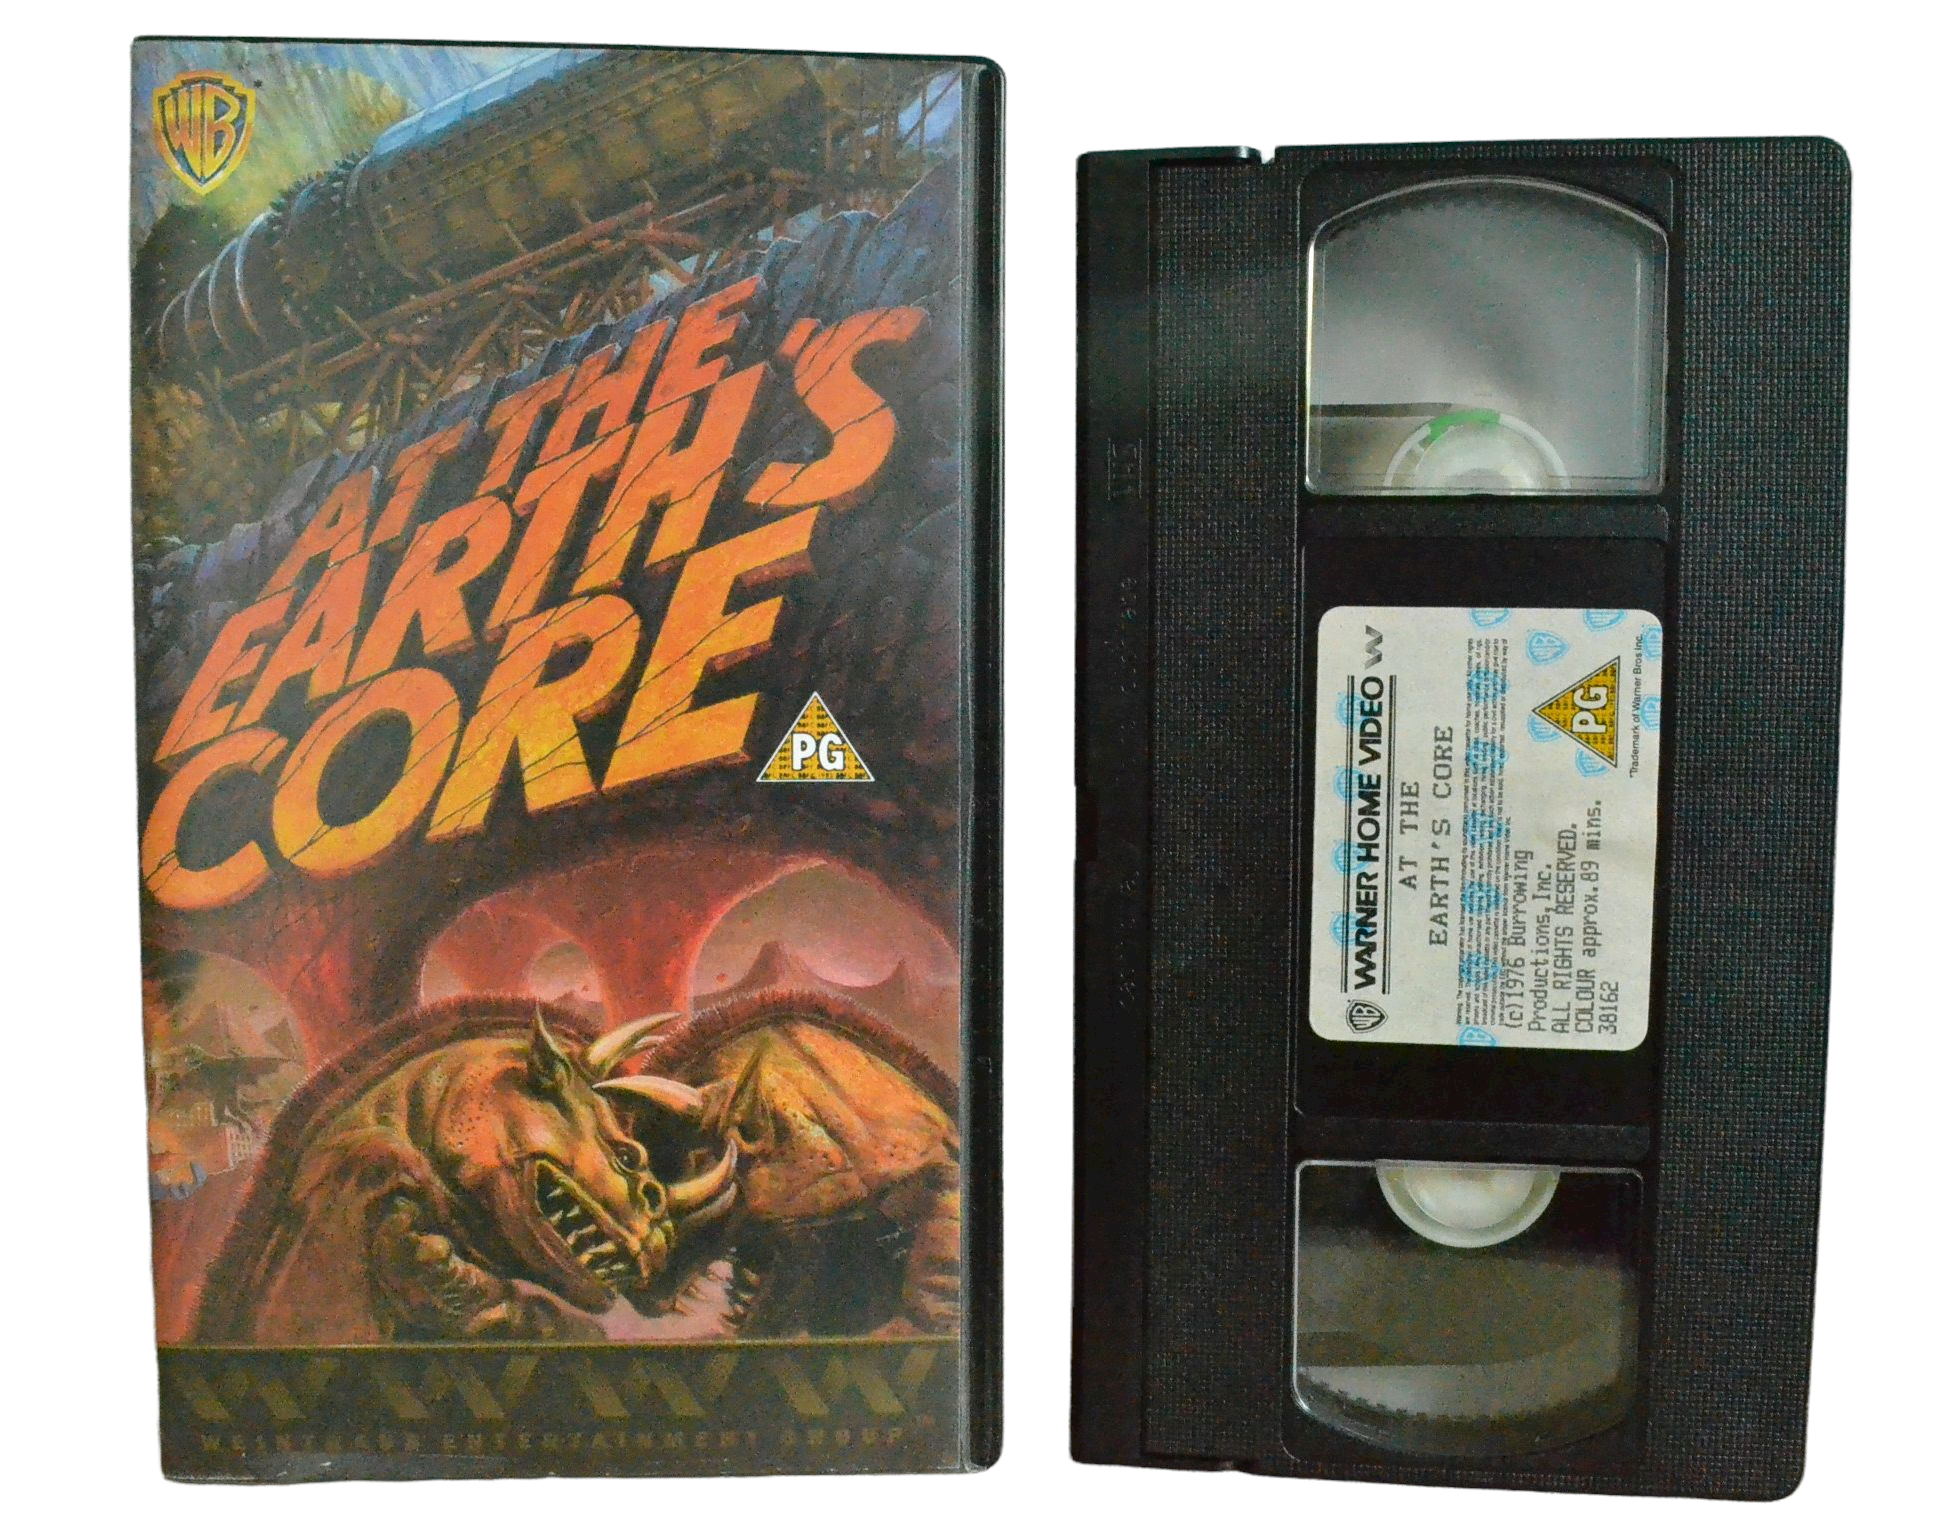 At The Earth's Core - Doug McClure - Warner Home Video - Vintage - Pal VHS-